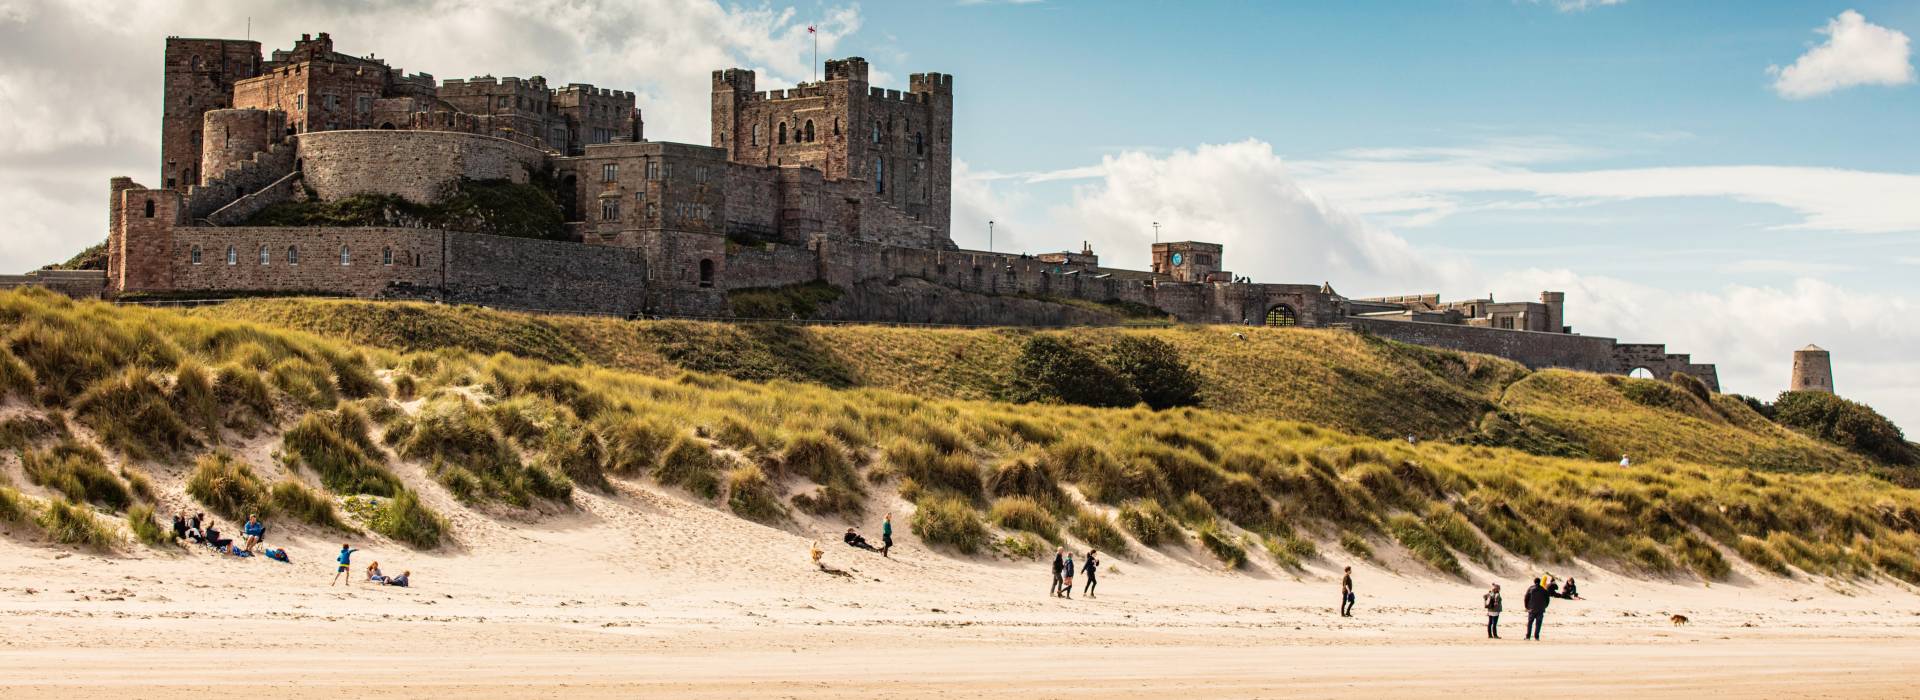 Bamburgh voted Best Seaside Destination in the UK for the fourth year running